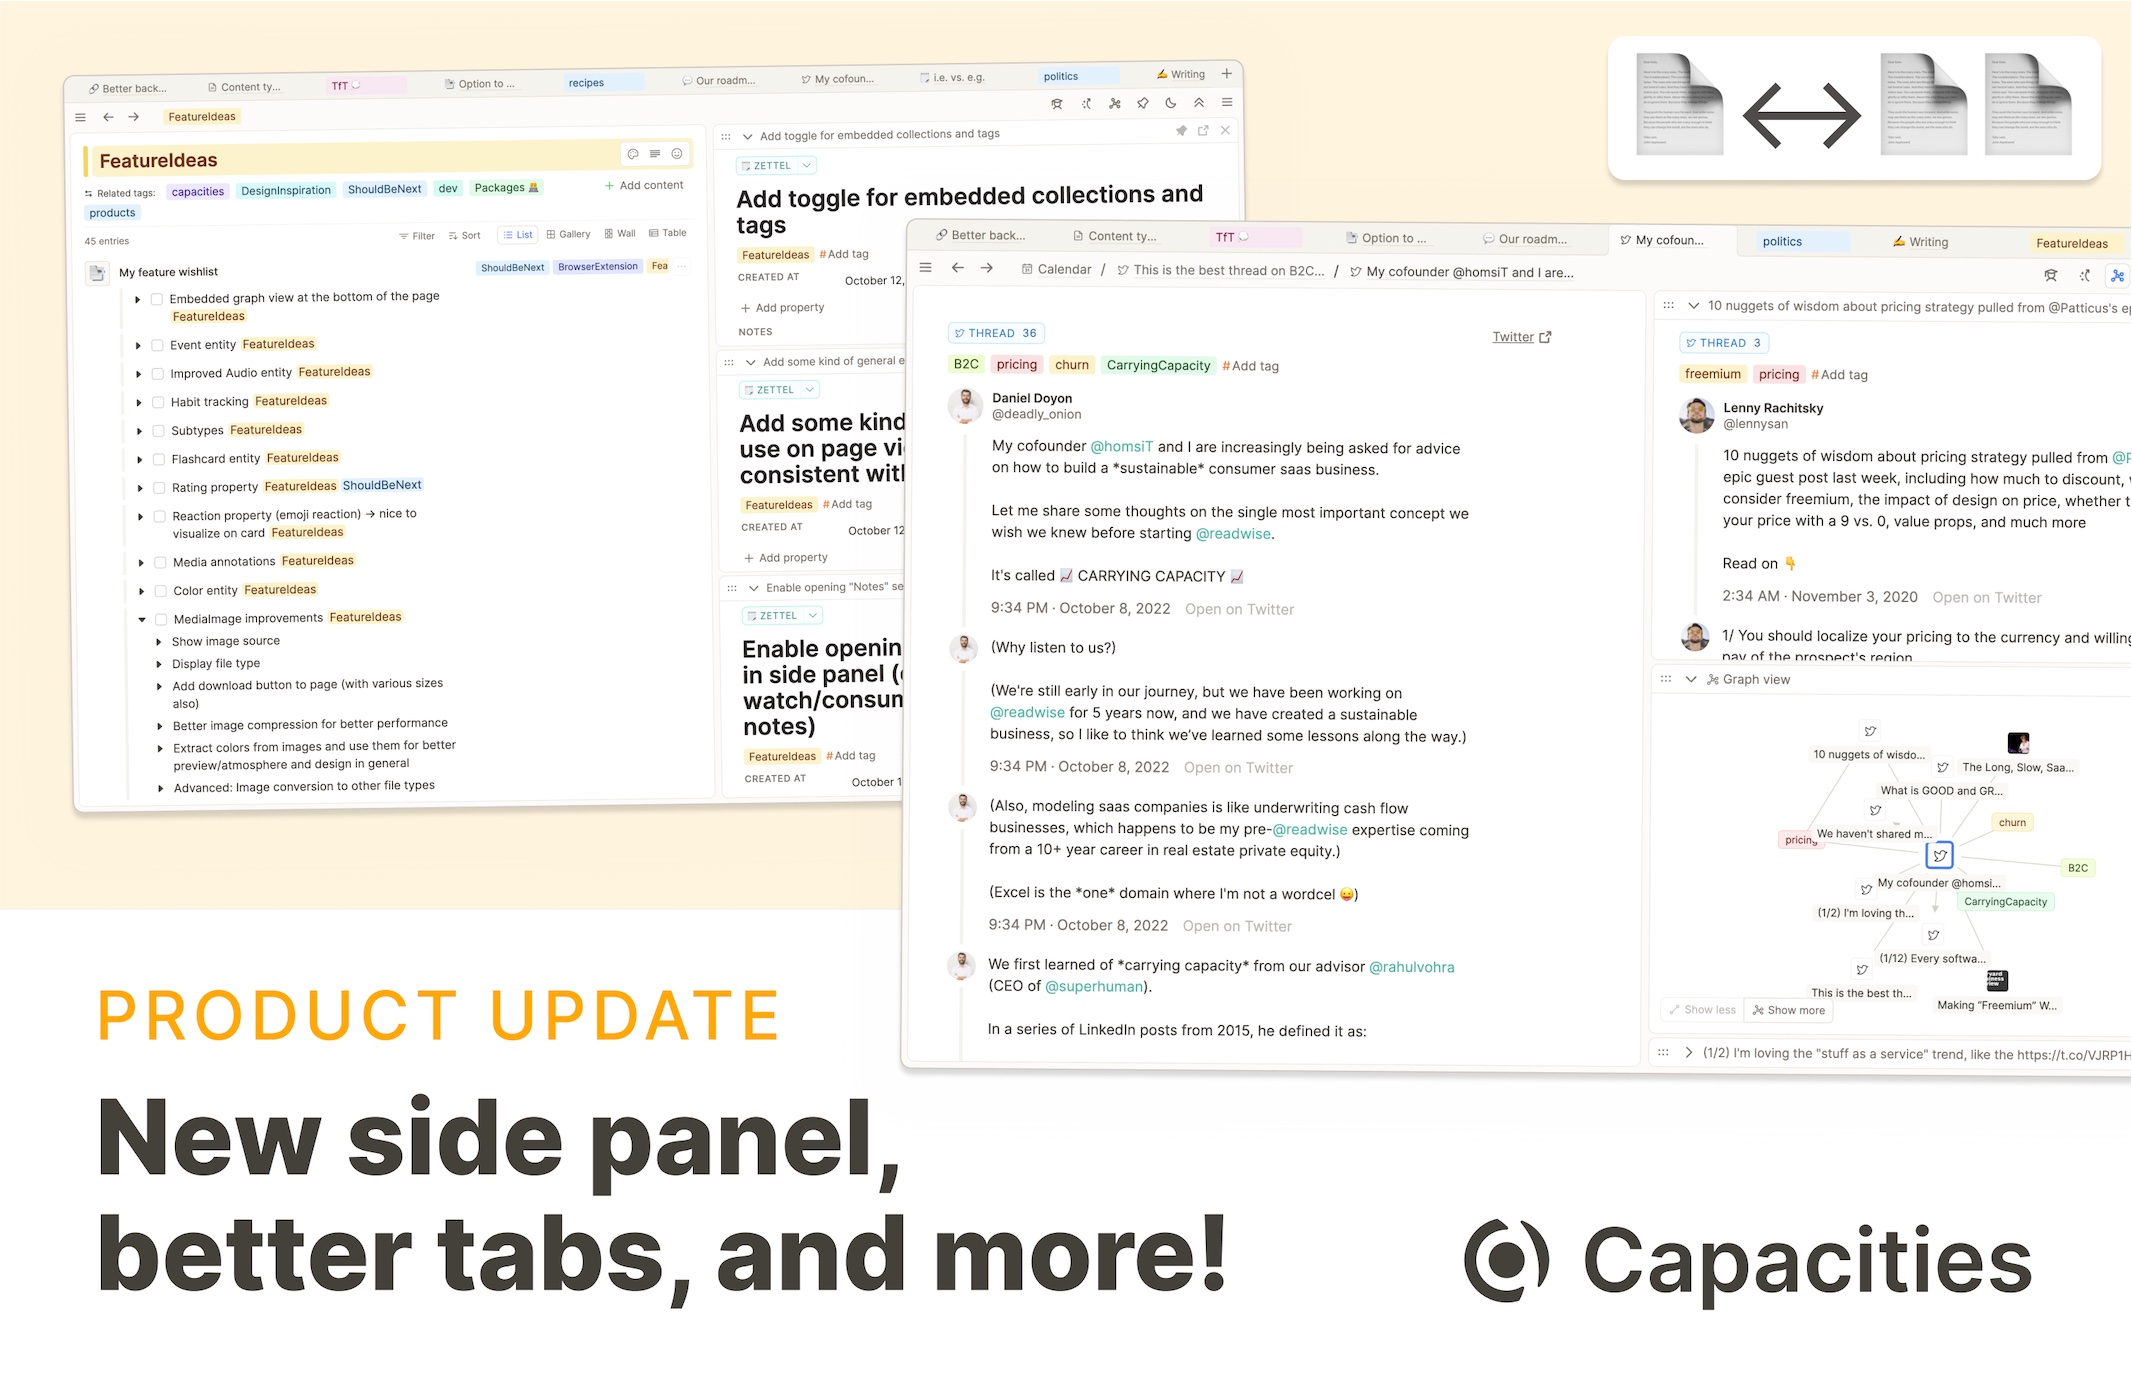 New sidepanel, better tabs, and more!